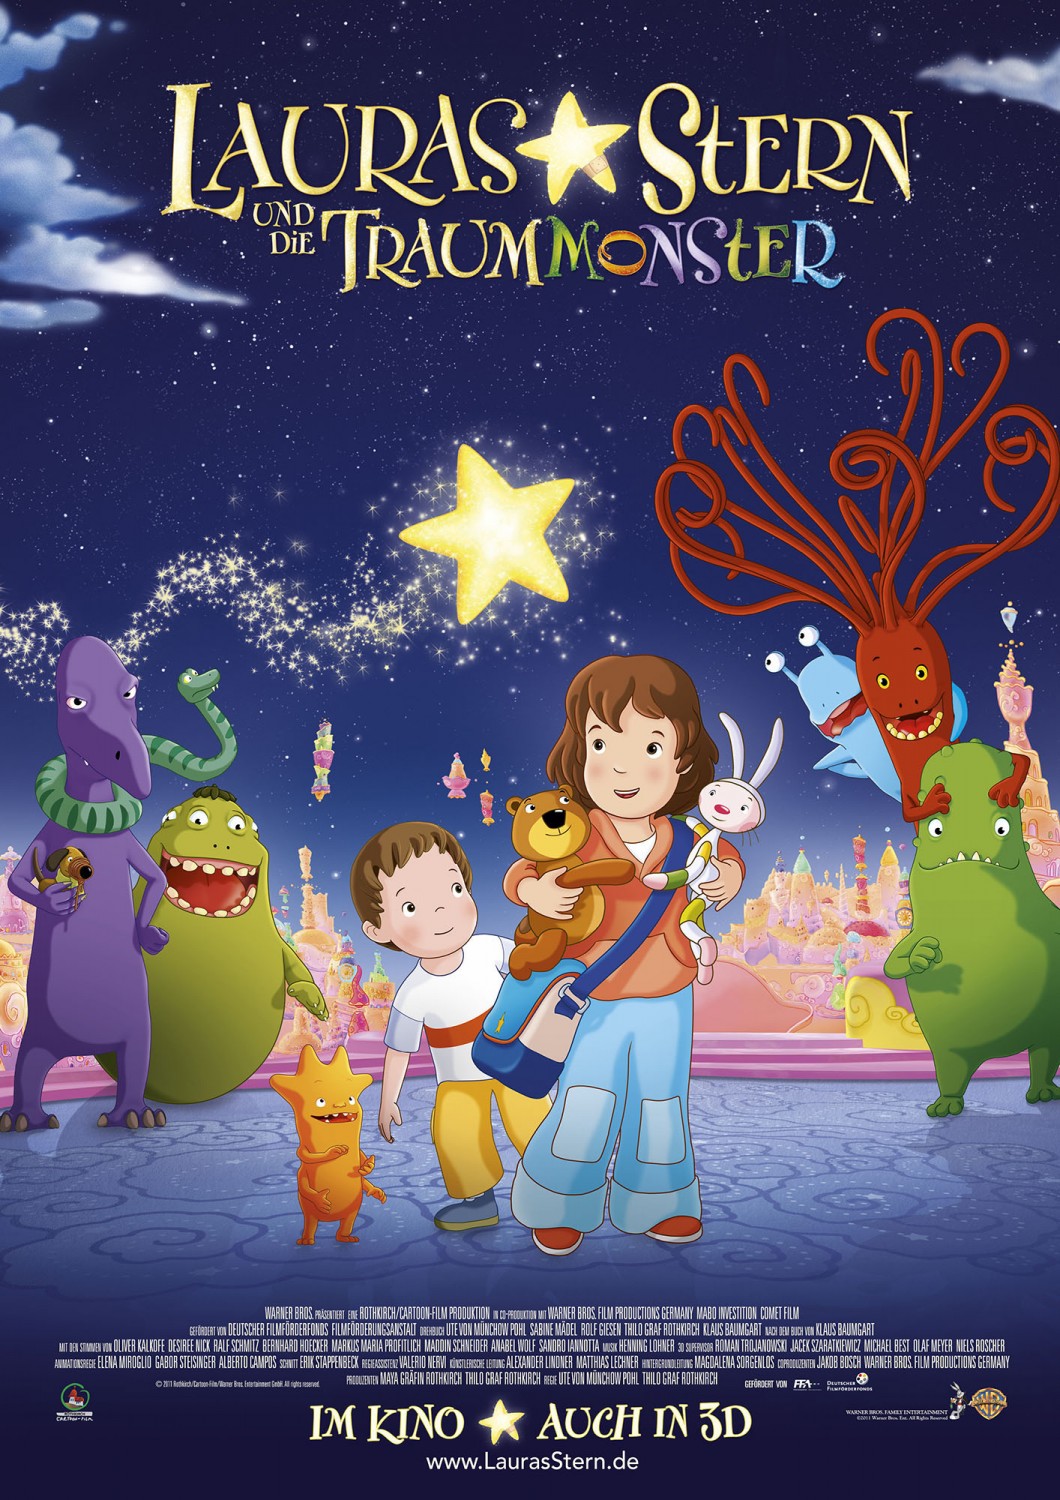 Extra Large Movie Poster Image for Lauras Stern und die Traummonster 